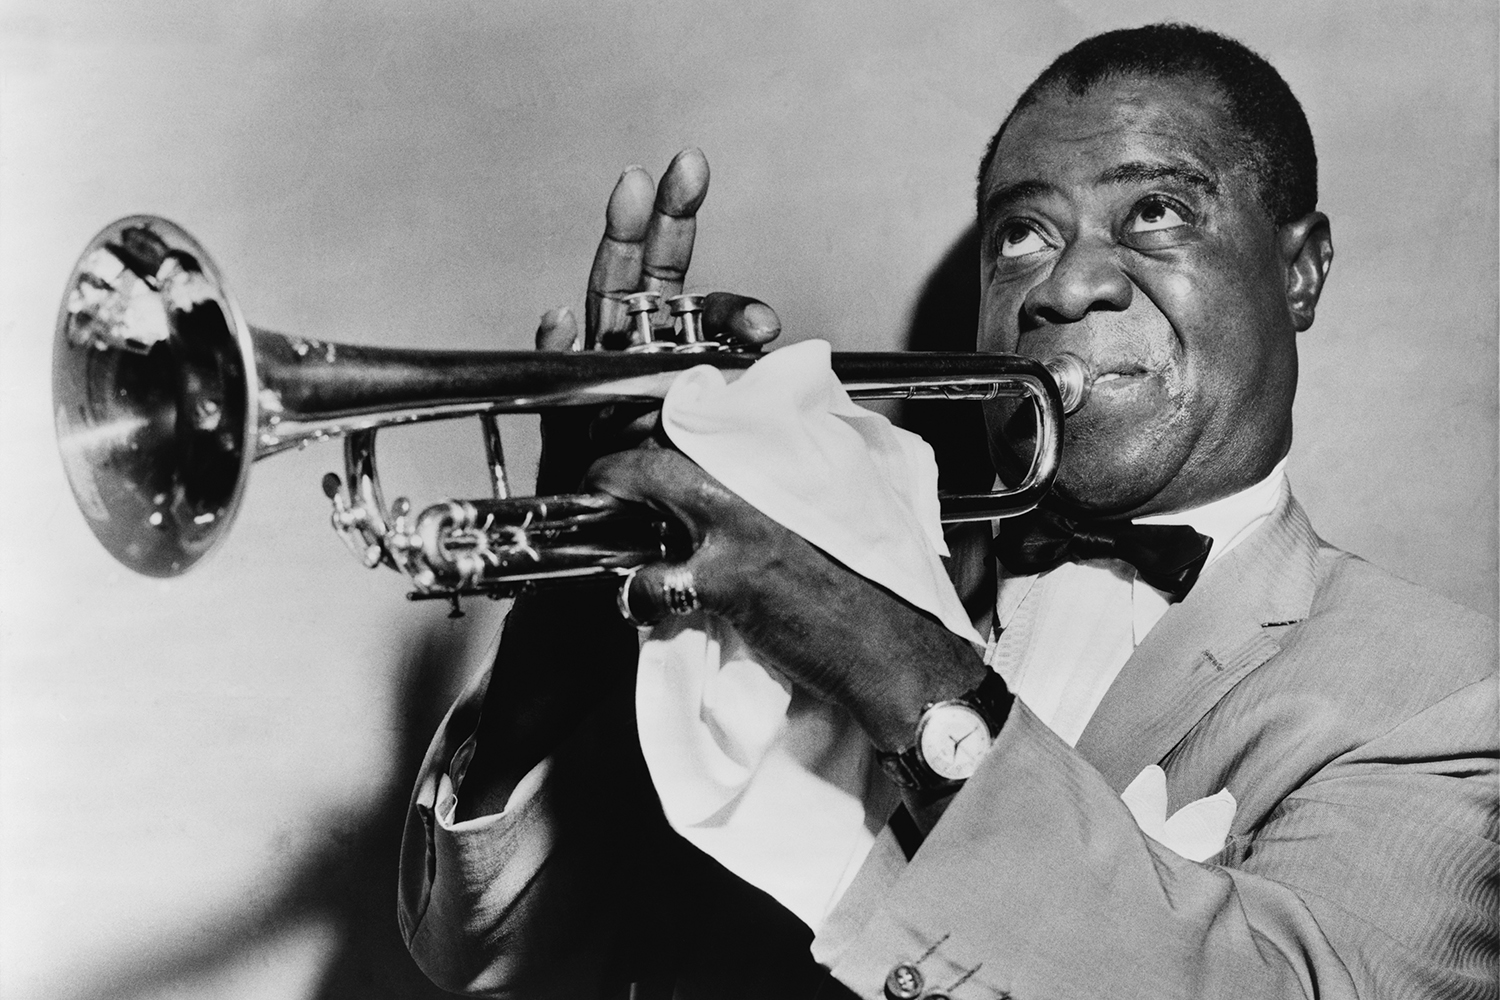 A black and white photo of Louis Armstrong performing on a trumpet